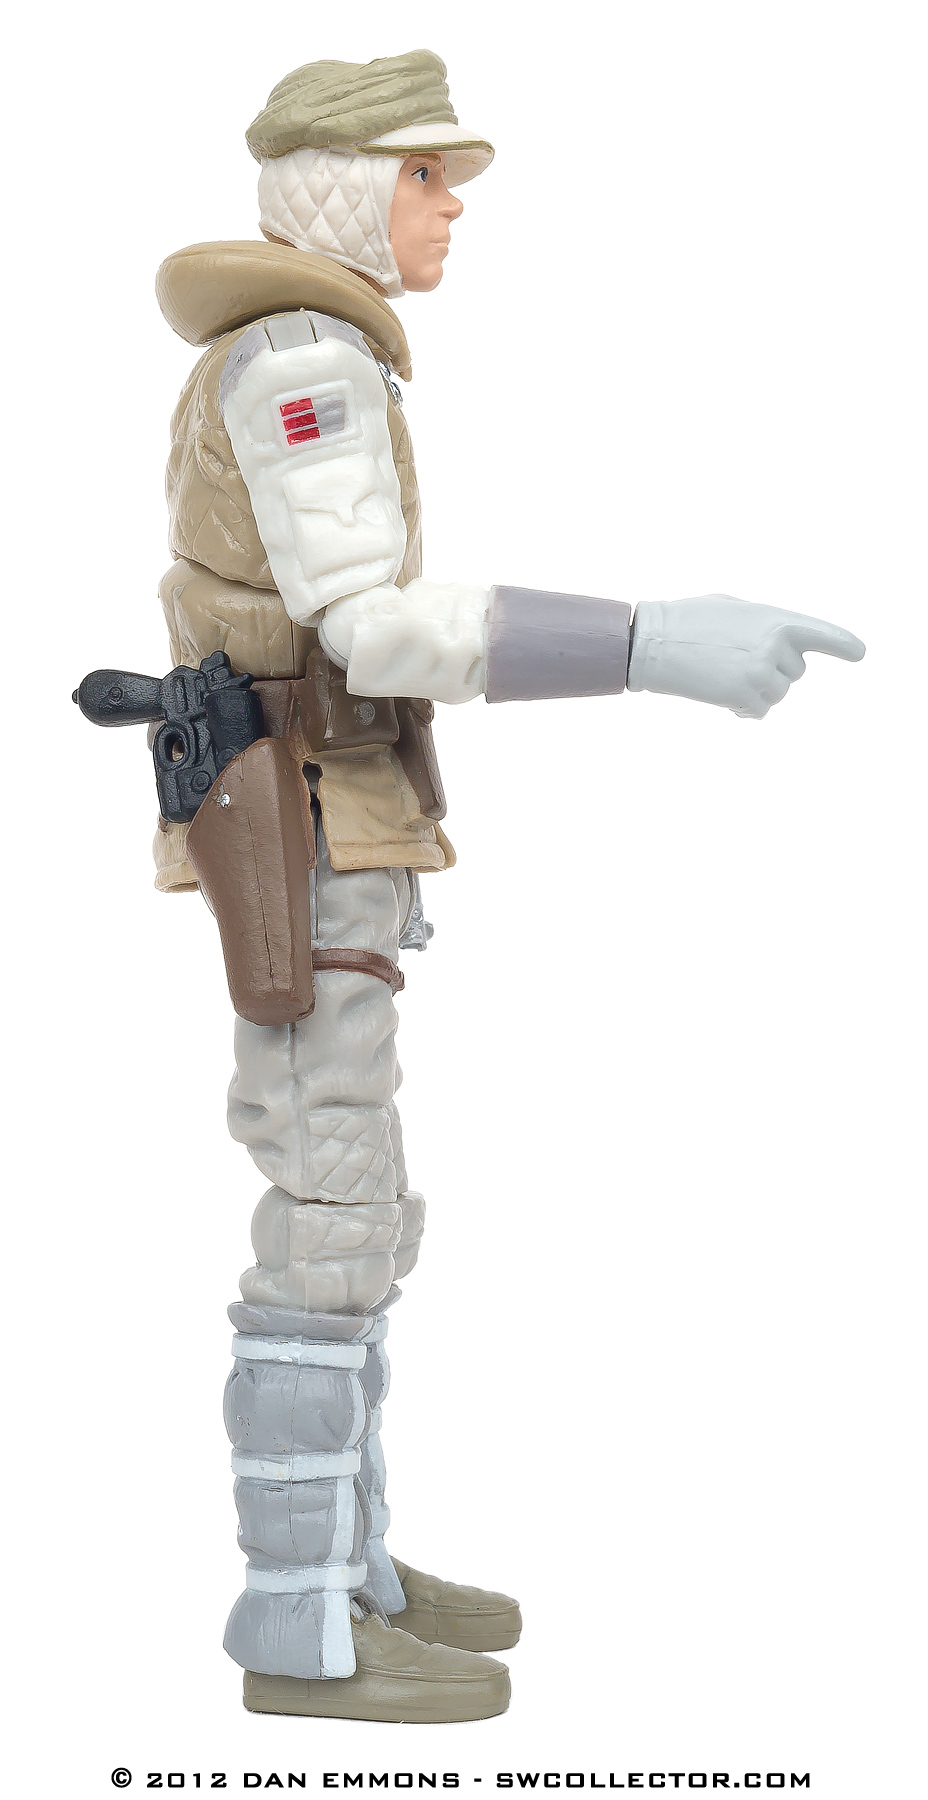 The Vintage Collection - VC95: Luke Skywalker (Hoth Outfit)